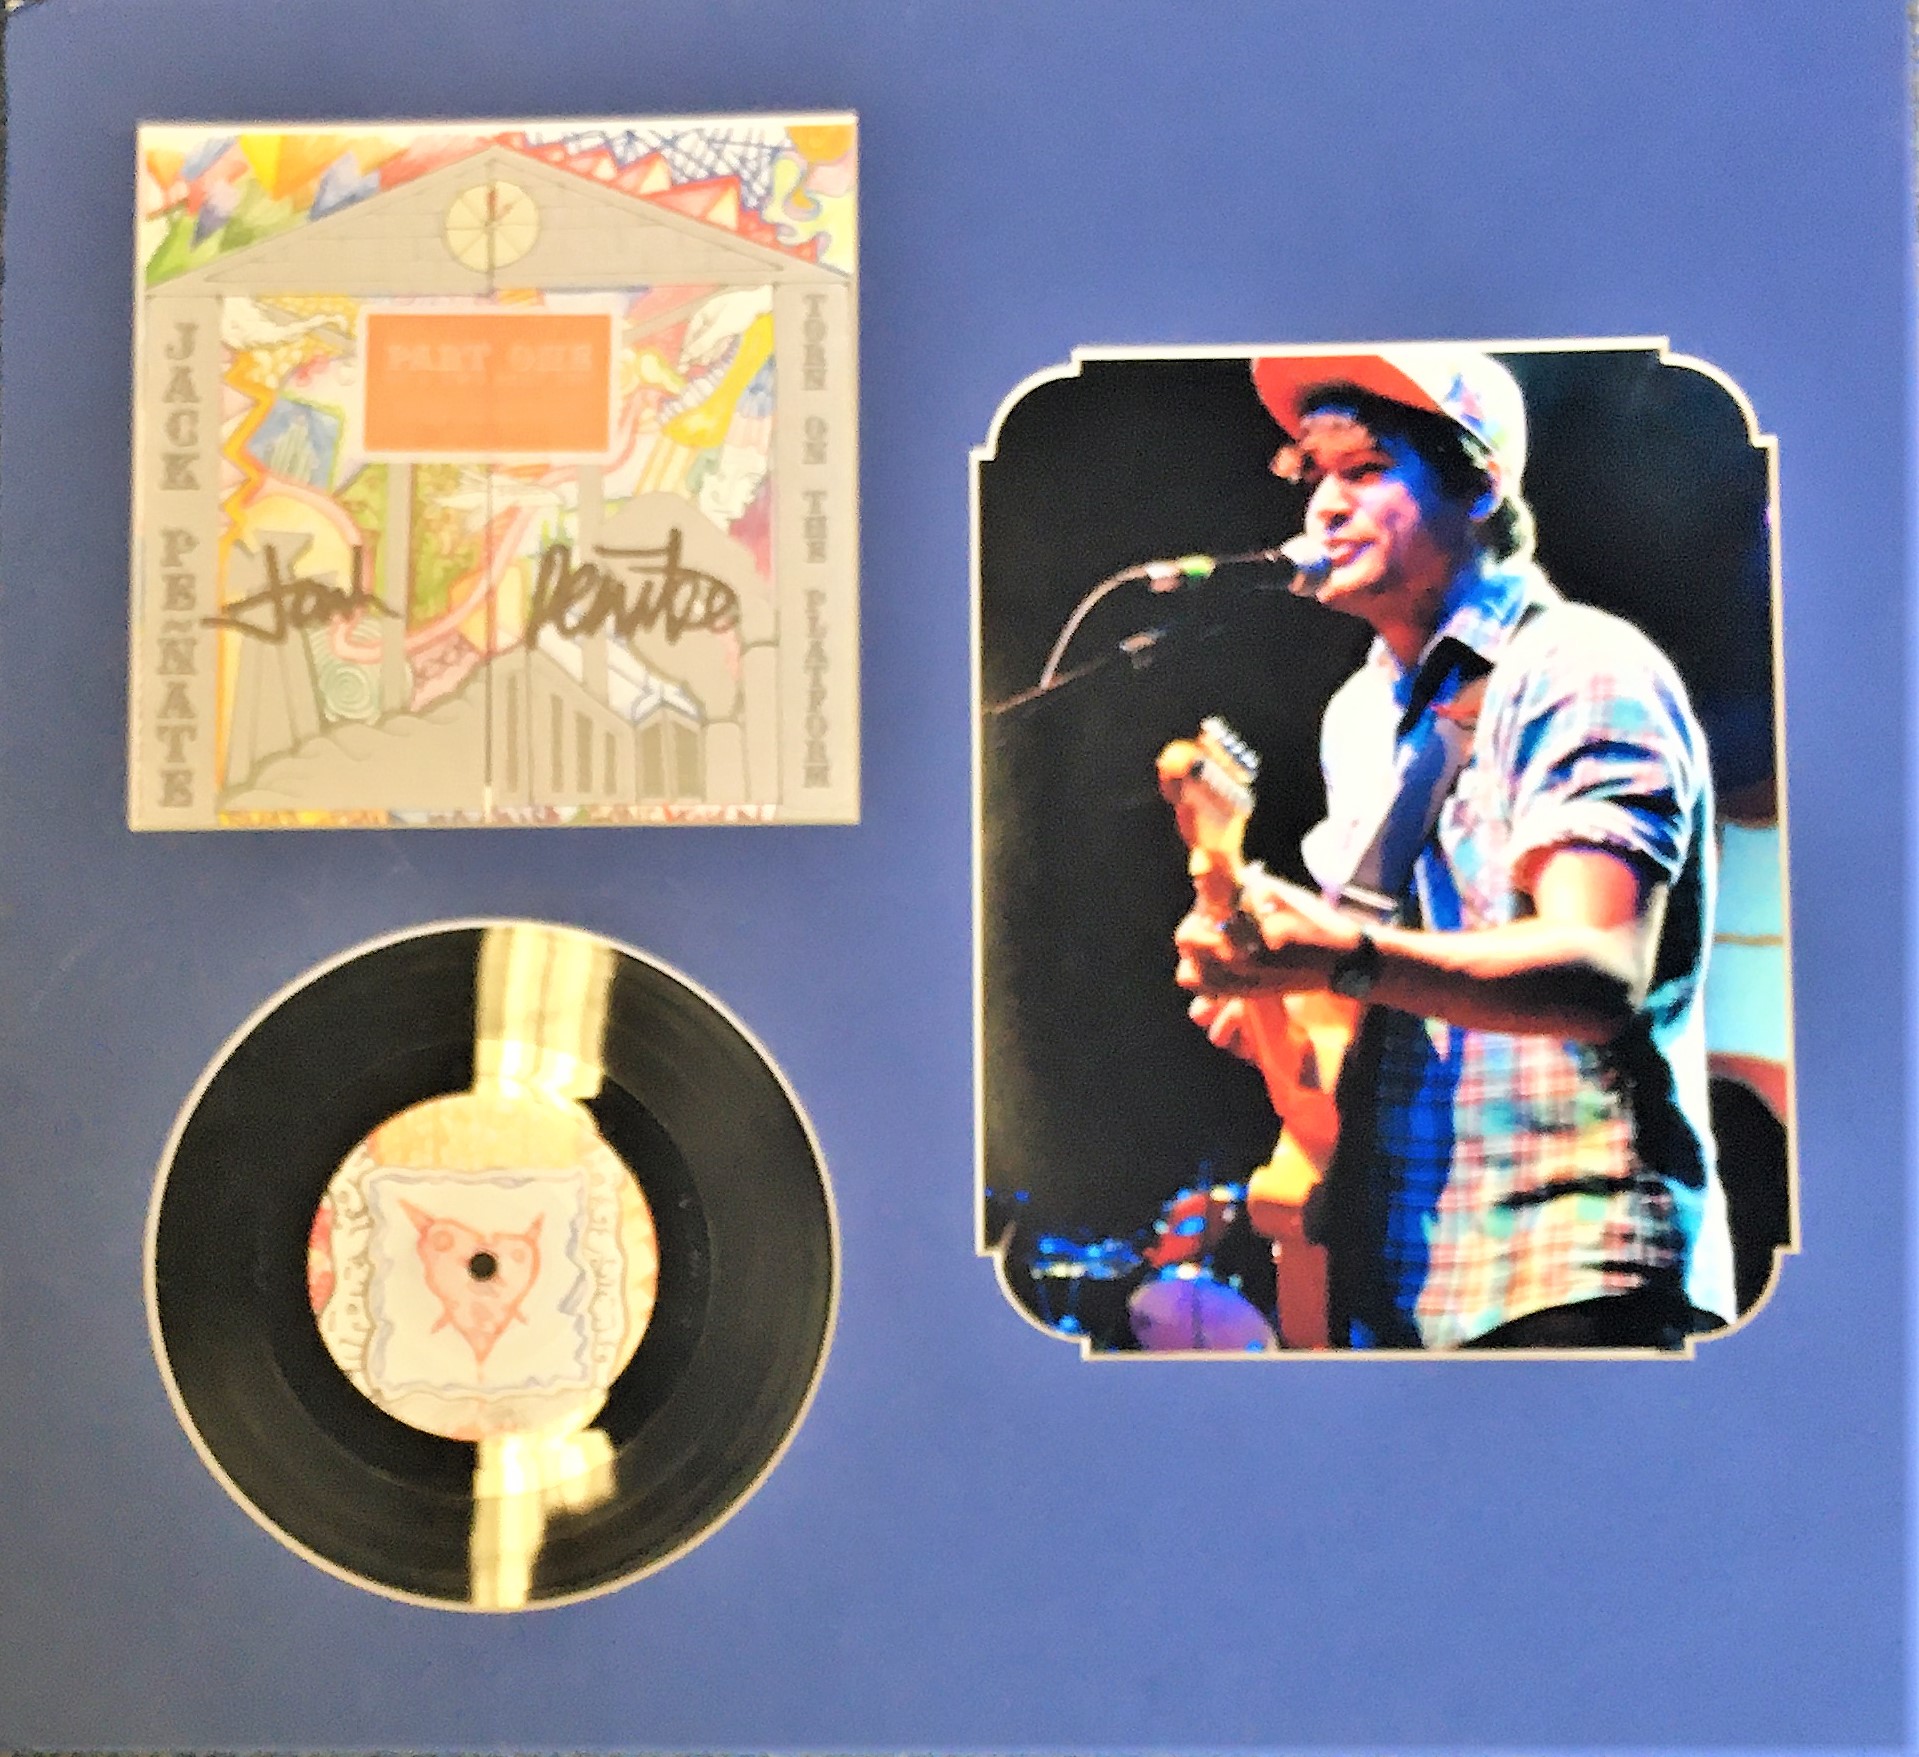 Jack Penate 17x18 signature piece includes colour photo, 45rpm vinyl record and signed sleeve all